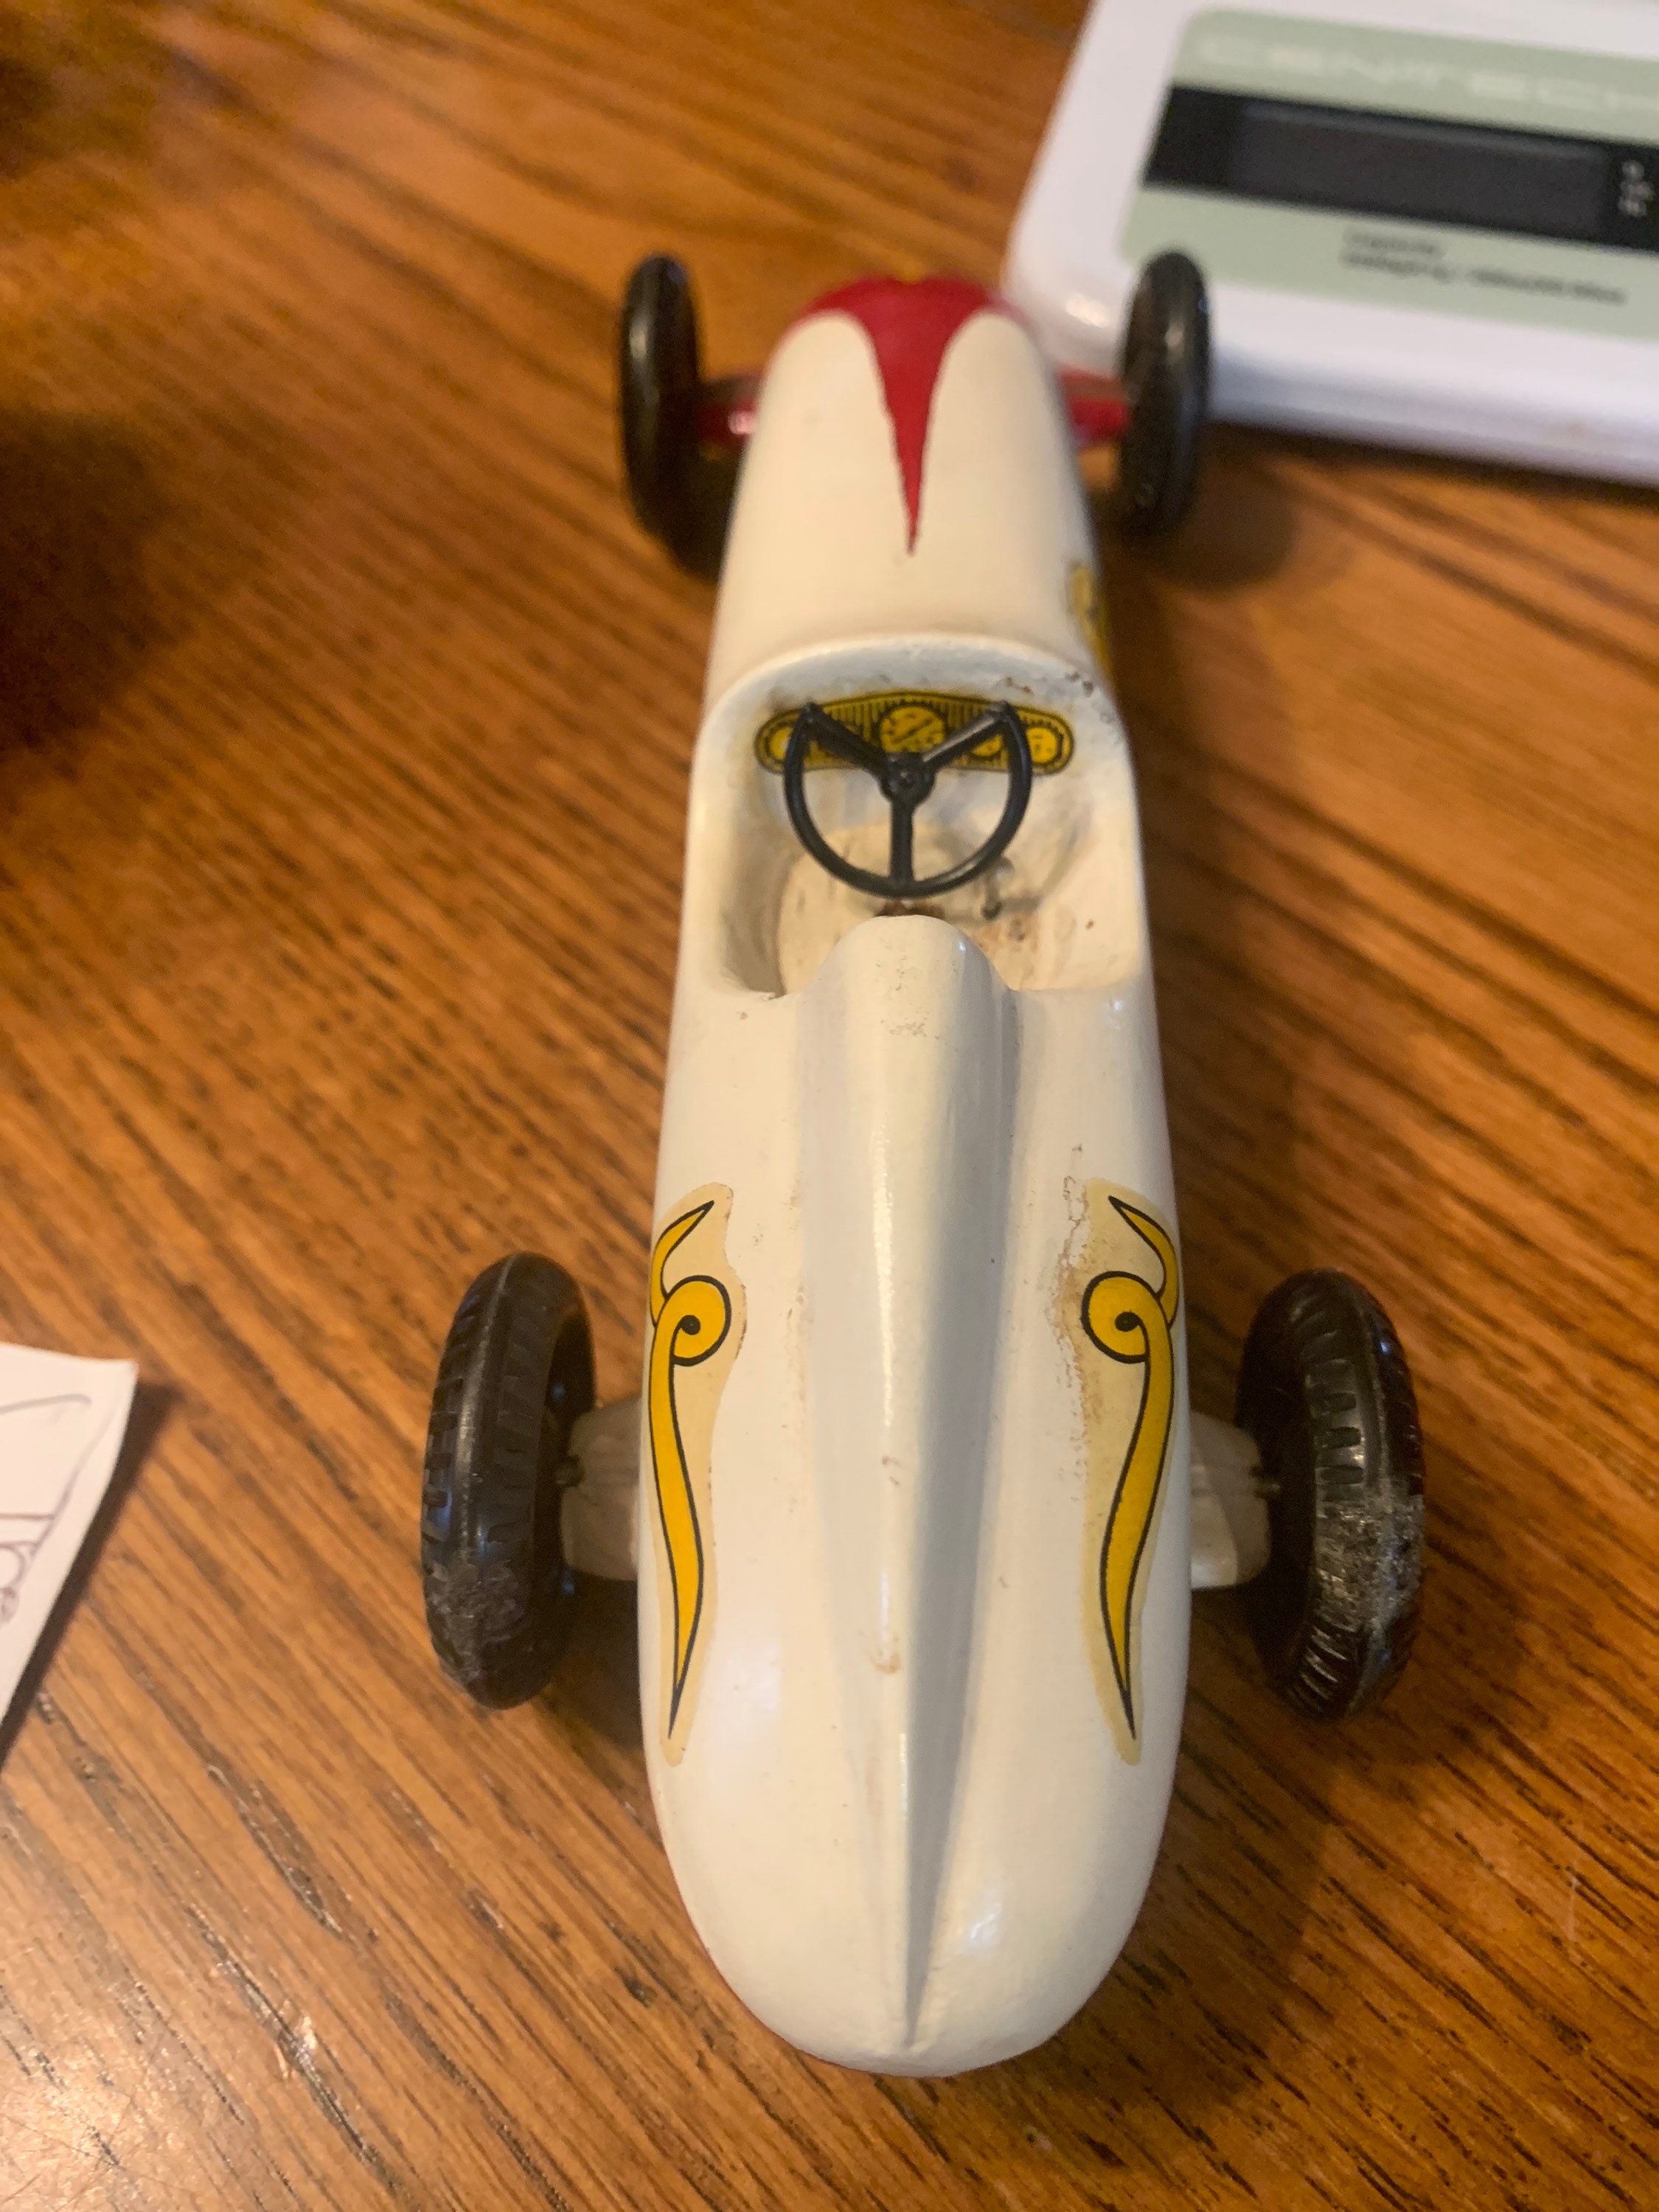 Early Pinewood Derby Race Car Red 29 Boattail Era Style Vintage Handcrafted  Wooden Toy -  Denmark